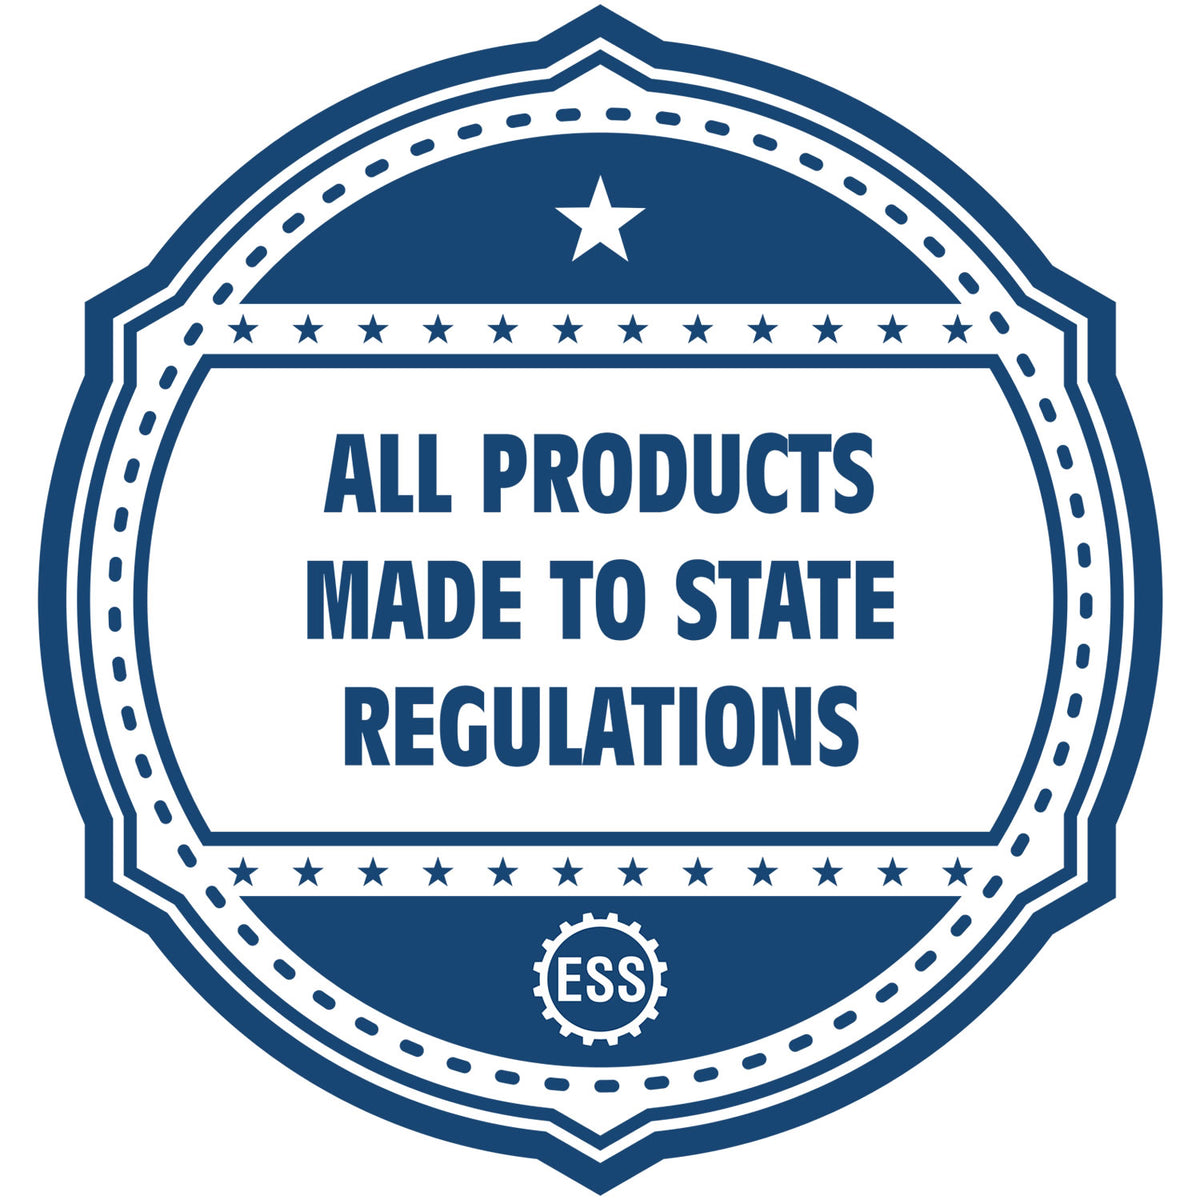 An icon or badge element for the Self-Inking New Mexico Landscape Architect Stamp showing that this product is made in compliance with state regulations.